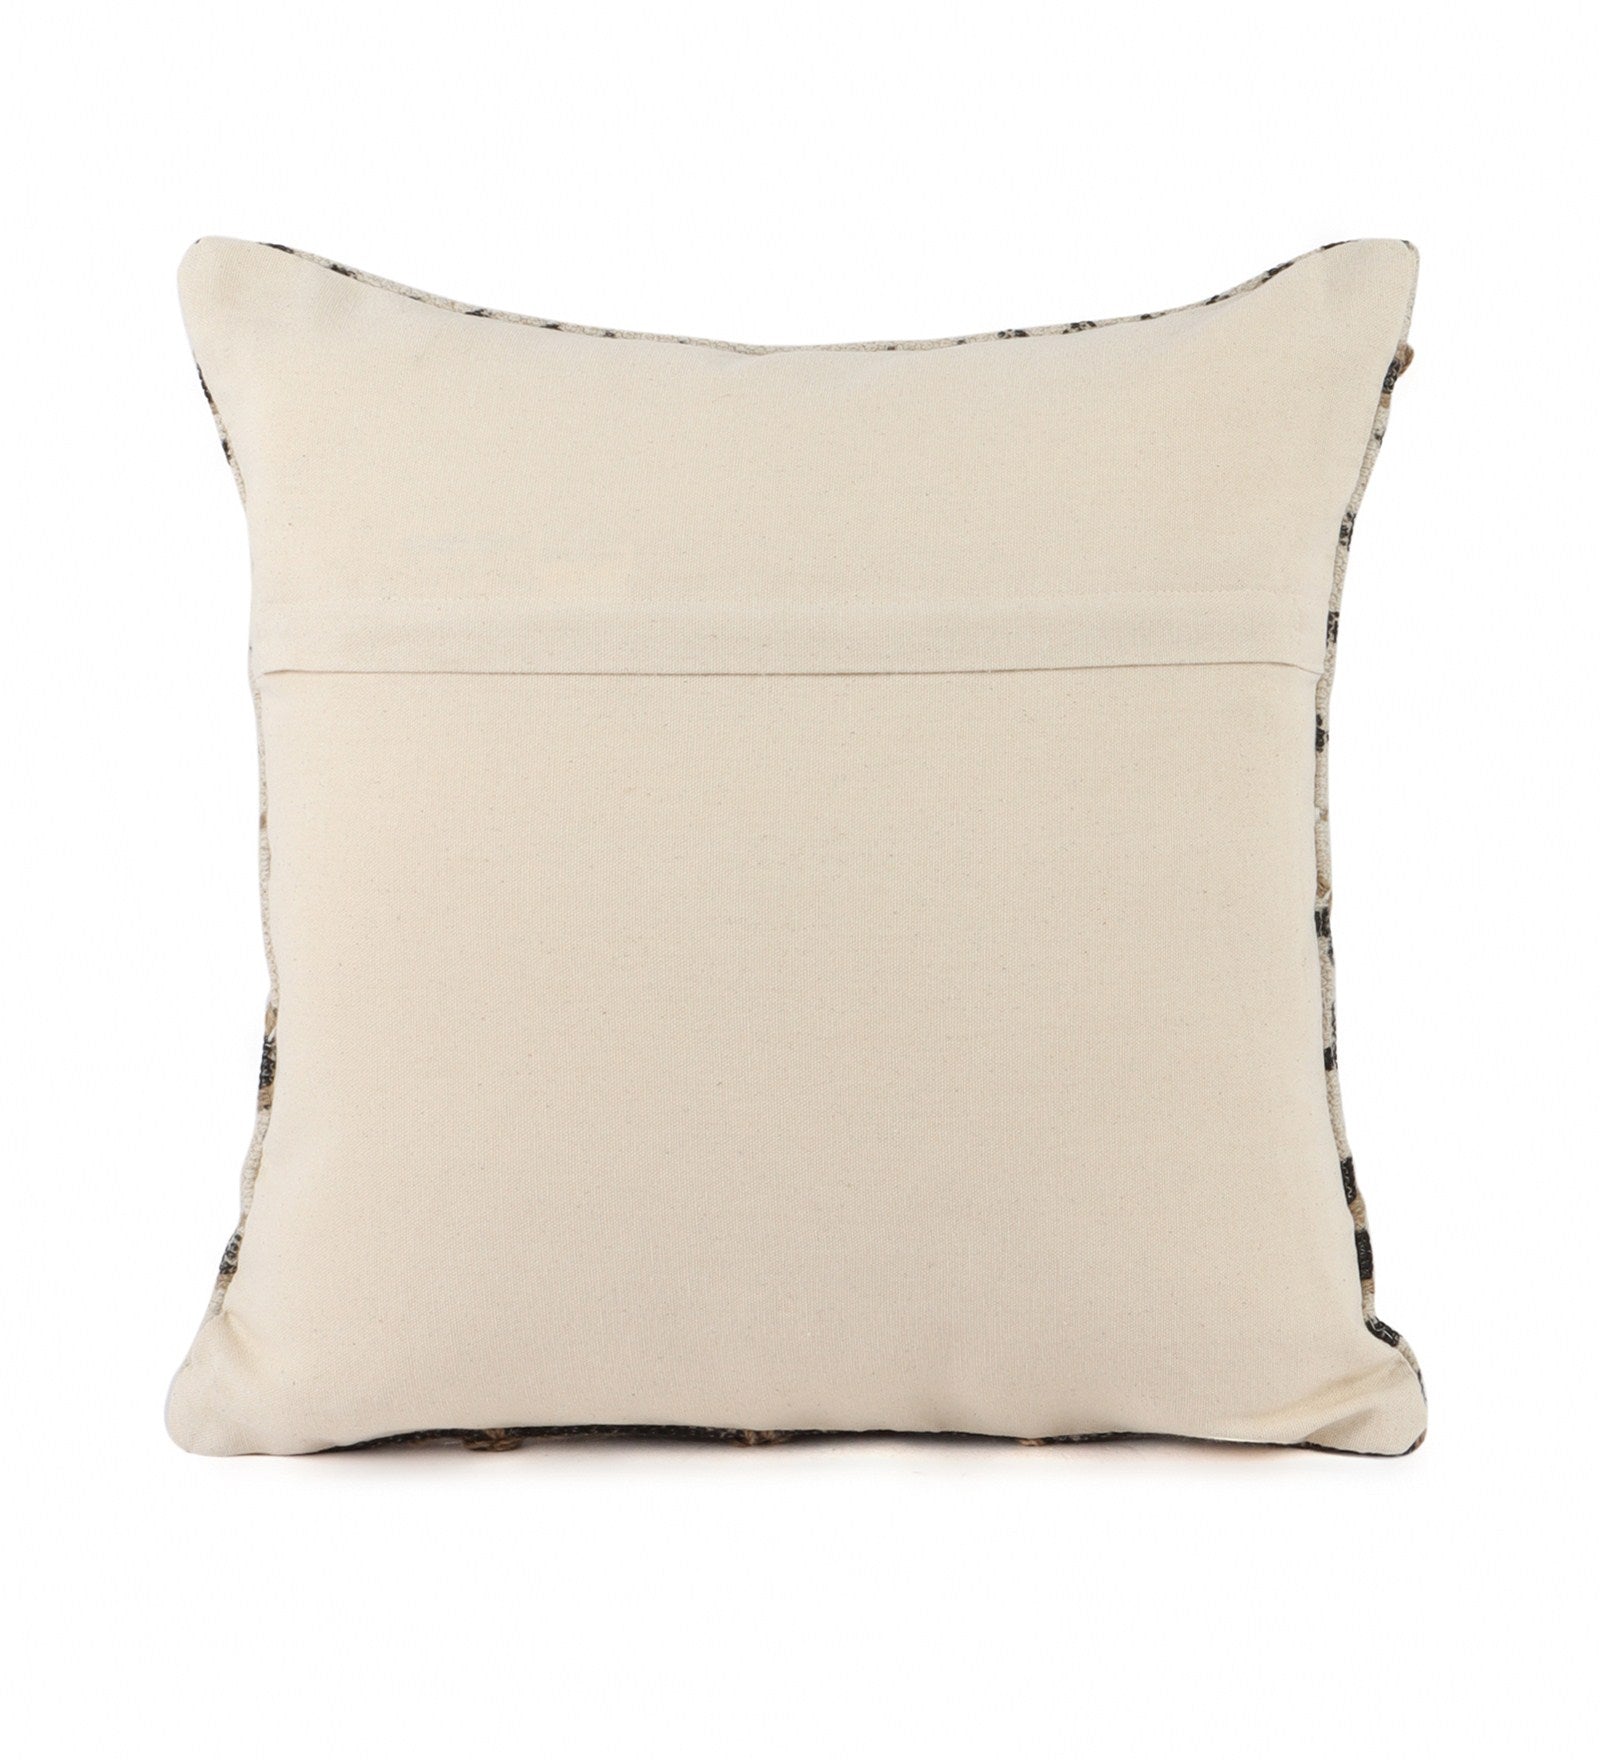 Embroidered Contemporary Cushion Cover (Blue Square)